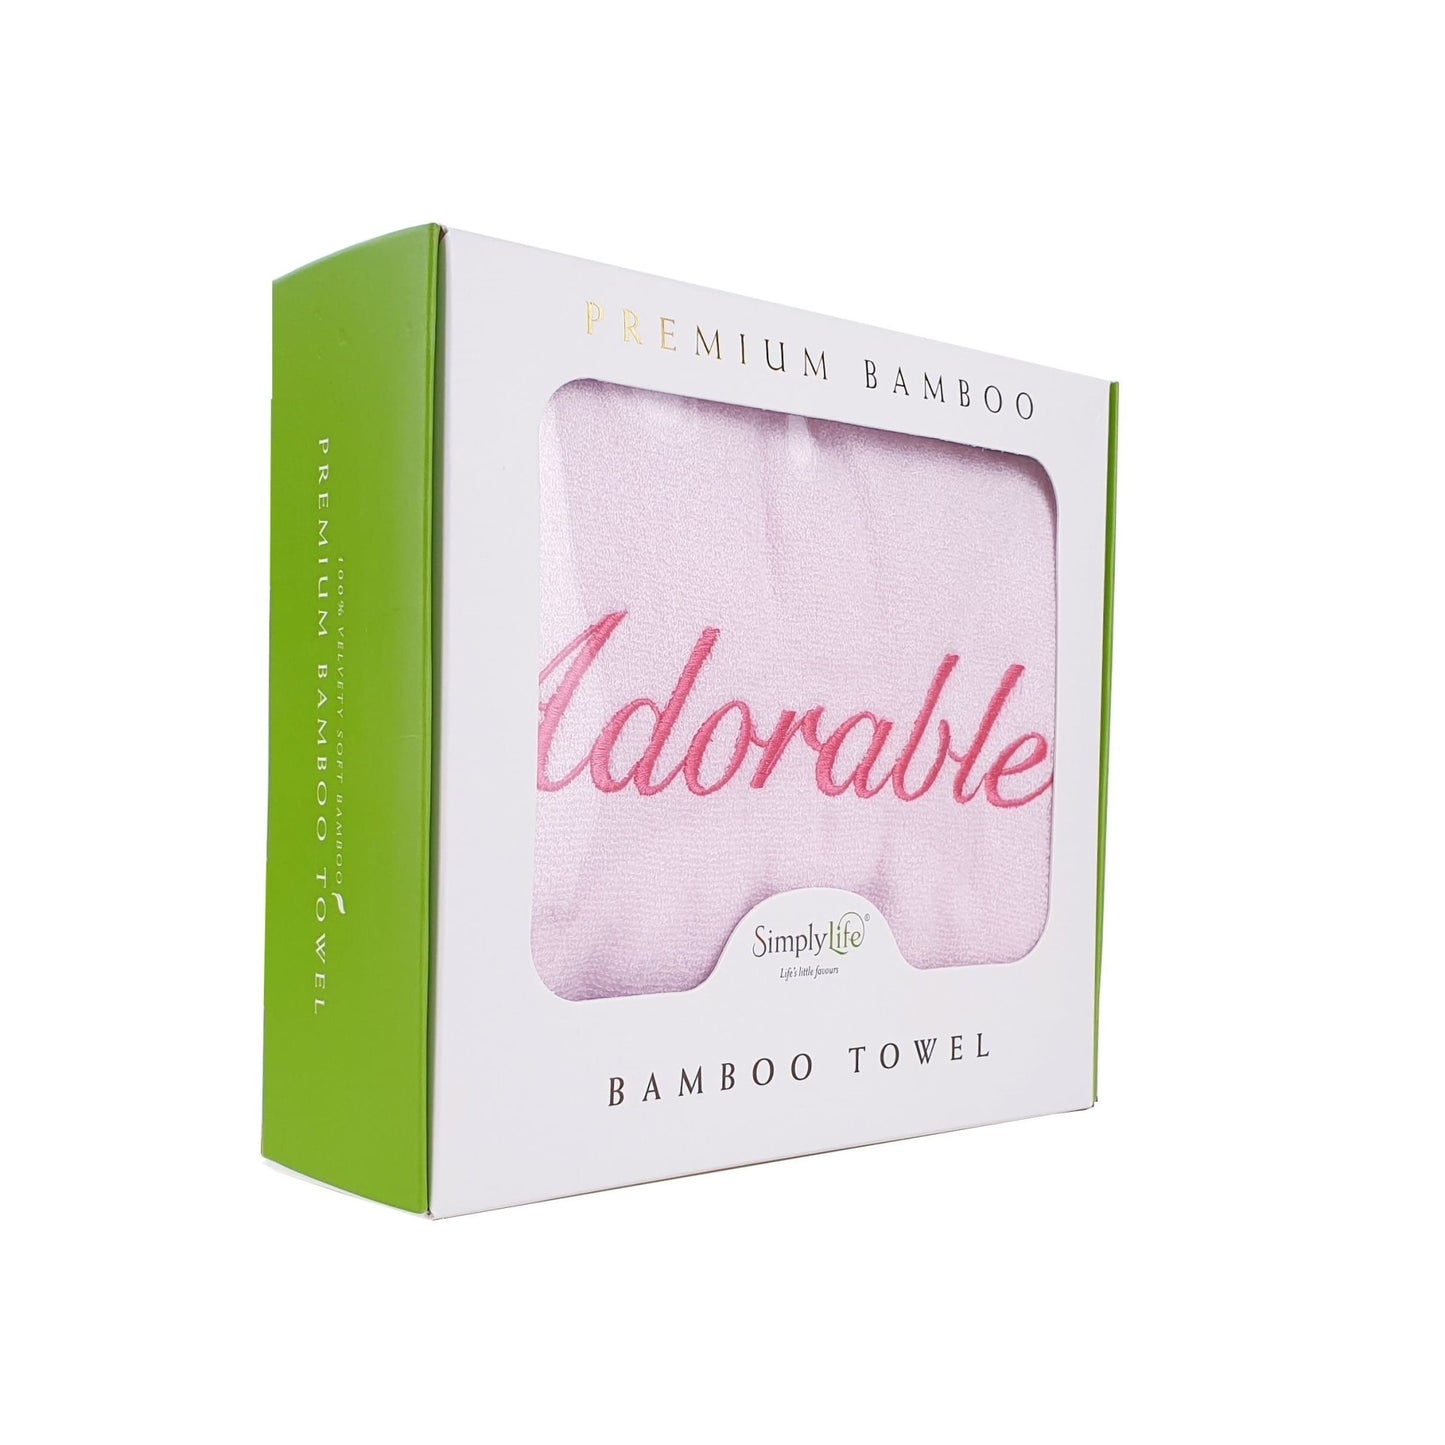 Adorable - Embroidered Premium Bamboo Towel (120x60 cm), Pink - Simply Life